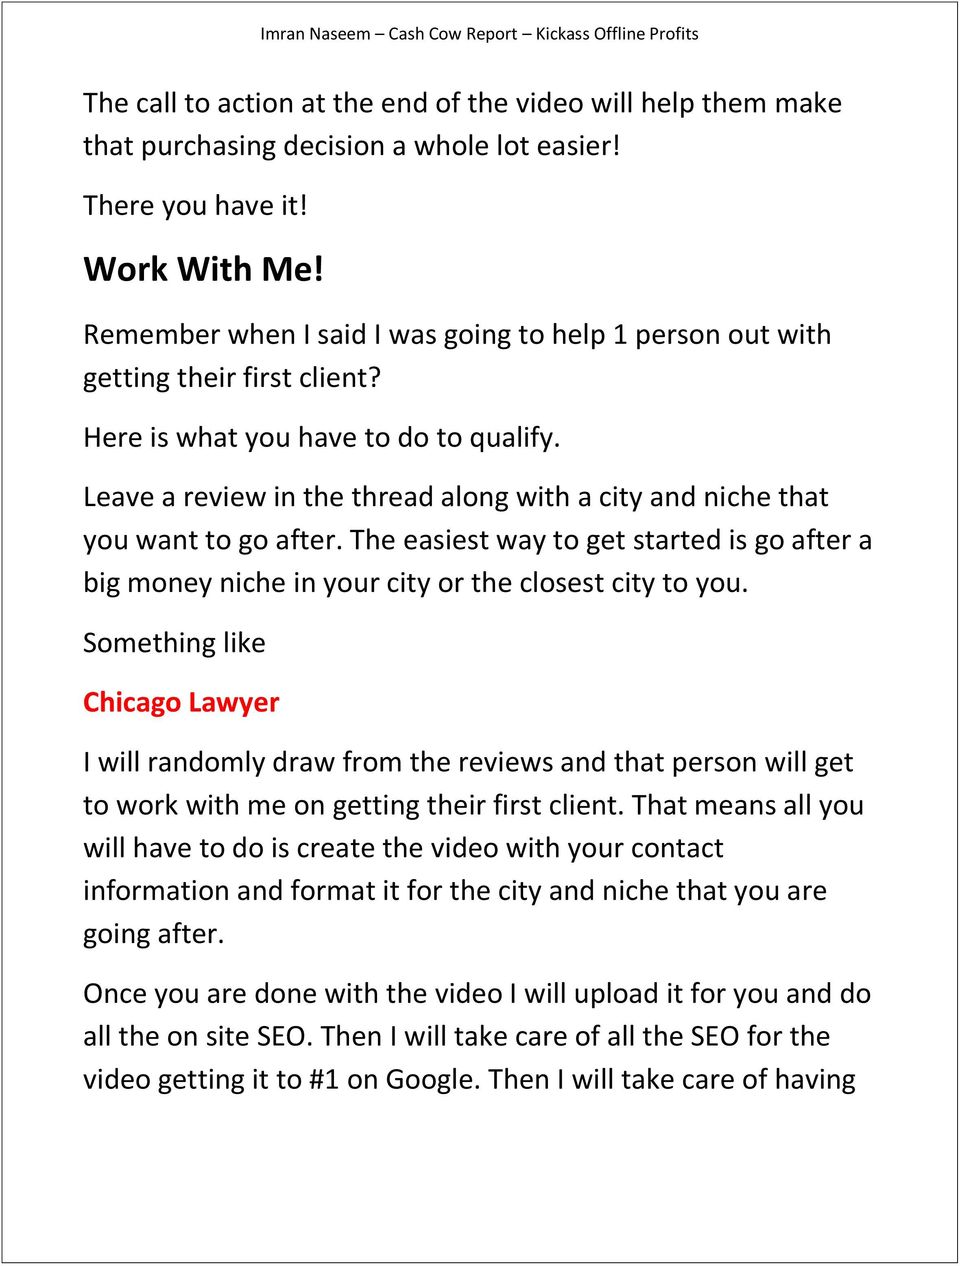 Leave a review in the thread along with a city and niche that you want to go after. The easiest way to get started is go after a big money niche in your city or the closest city to you.